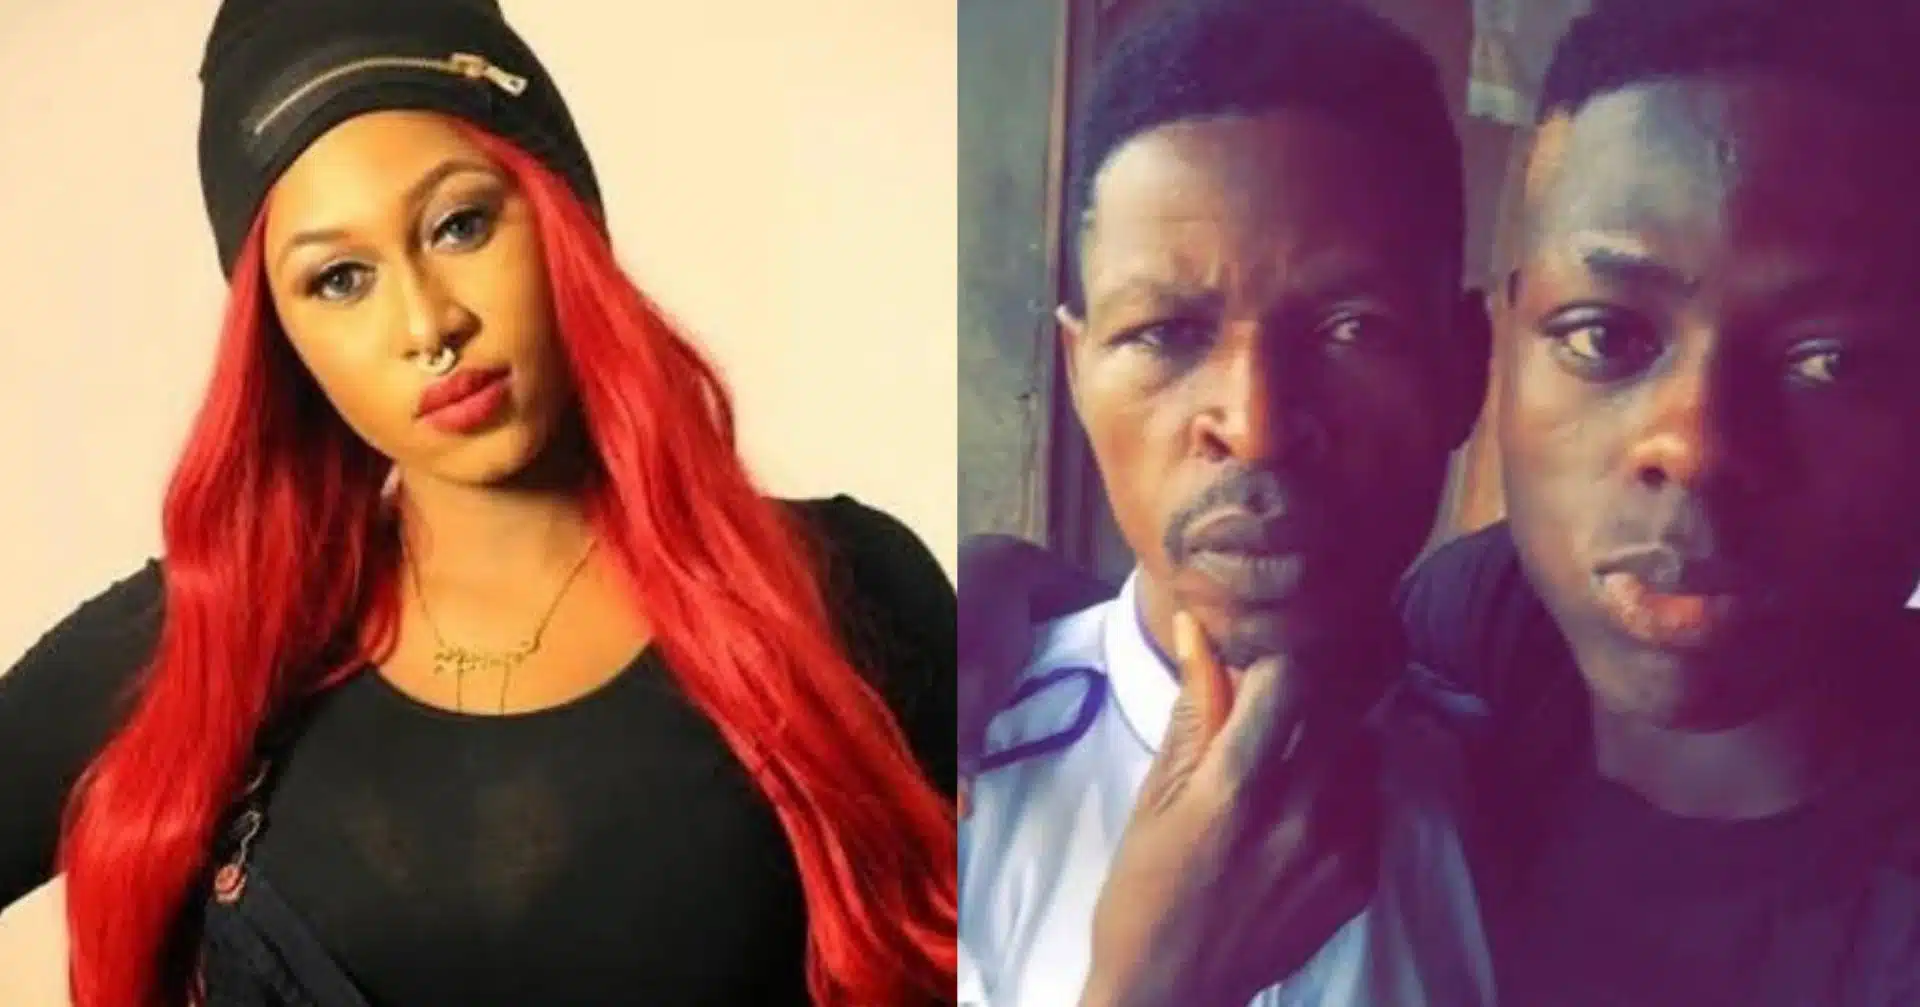 “You mean a grieving father is lying about these things” – Cynthia Morgan chastises Nigerians tackling Mohbad’s father